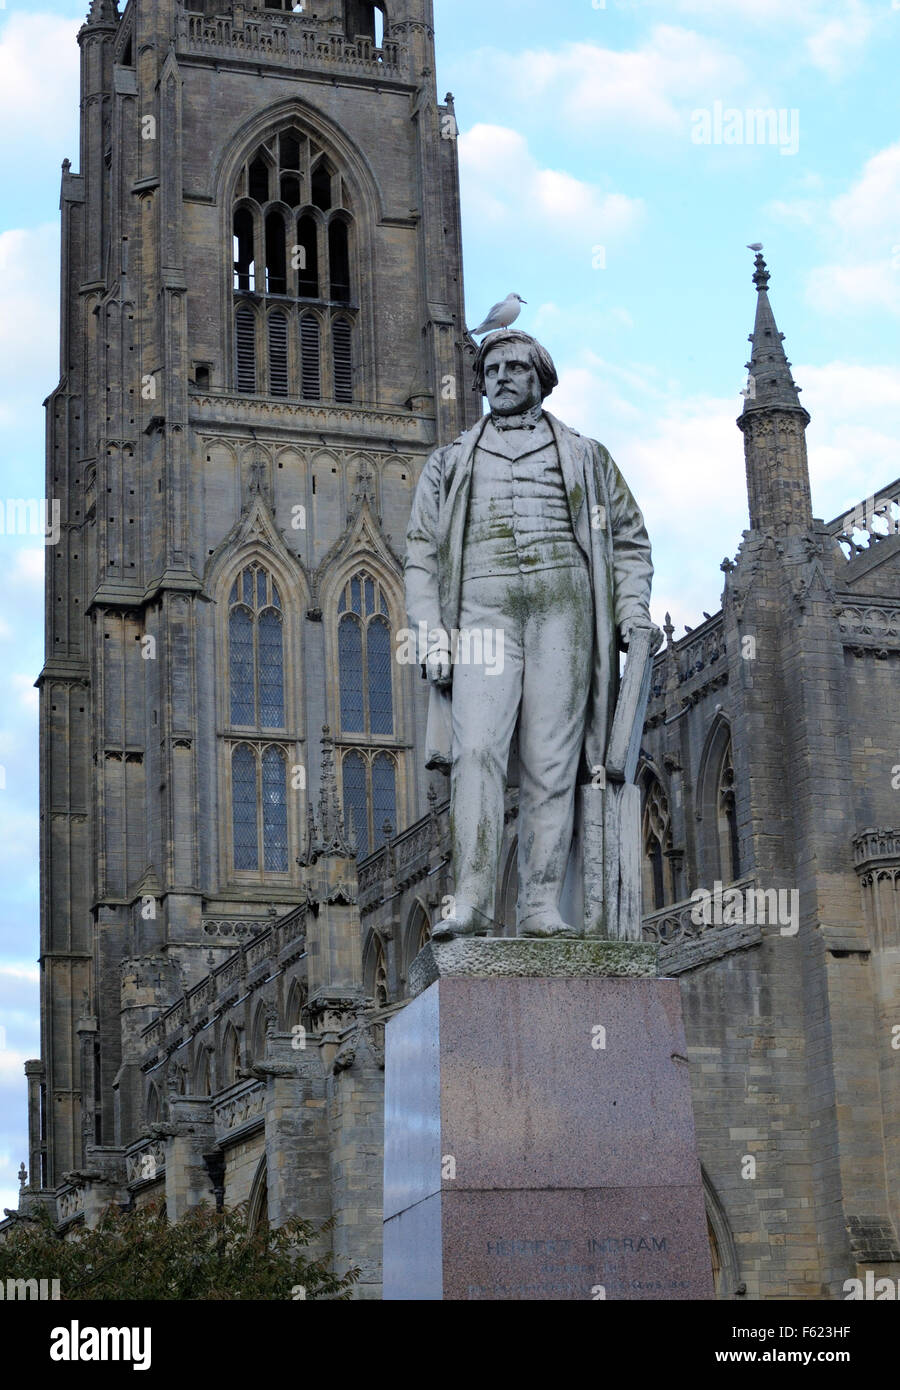 A statue of Herbert Ingram who founded the Illustrated London News stands in fornt of the Boston Stump Stock Photo